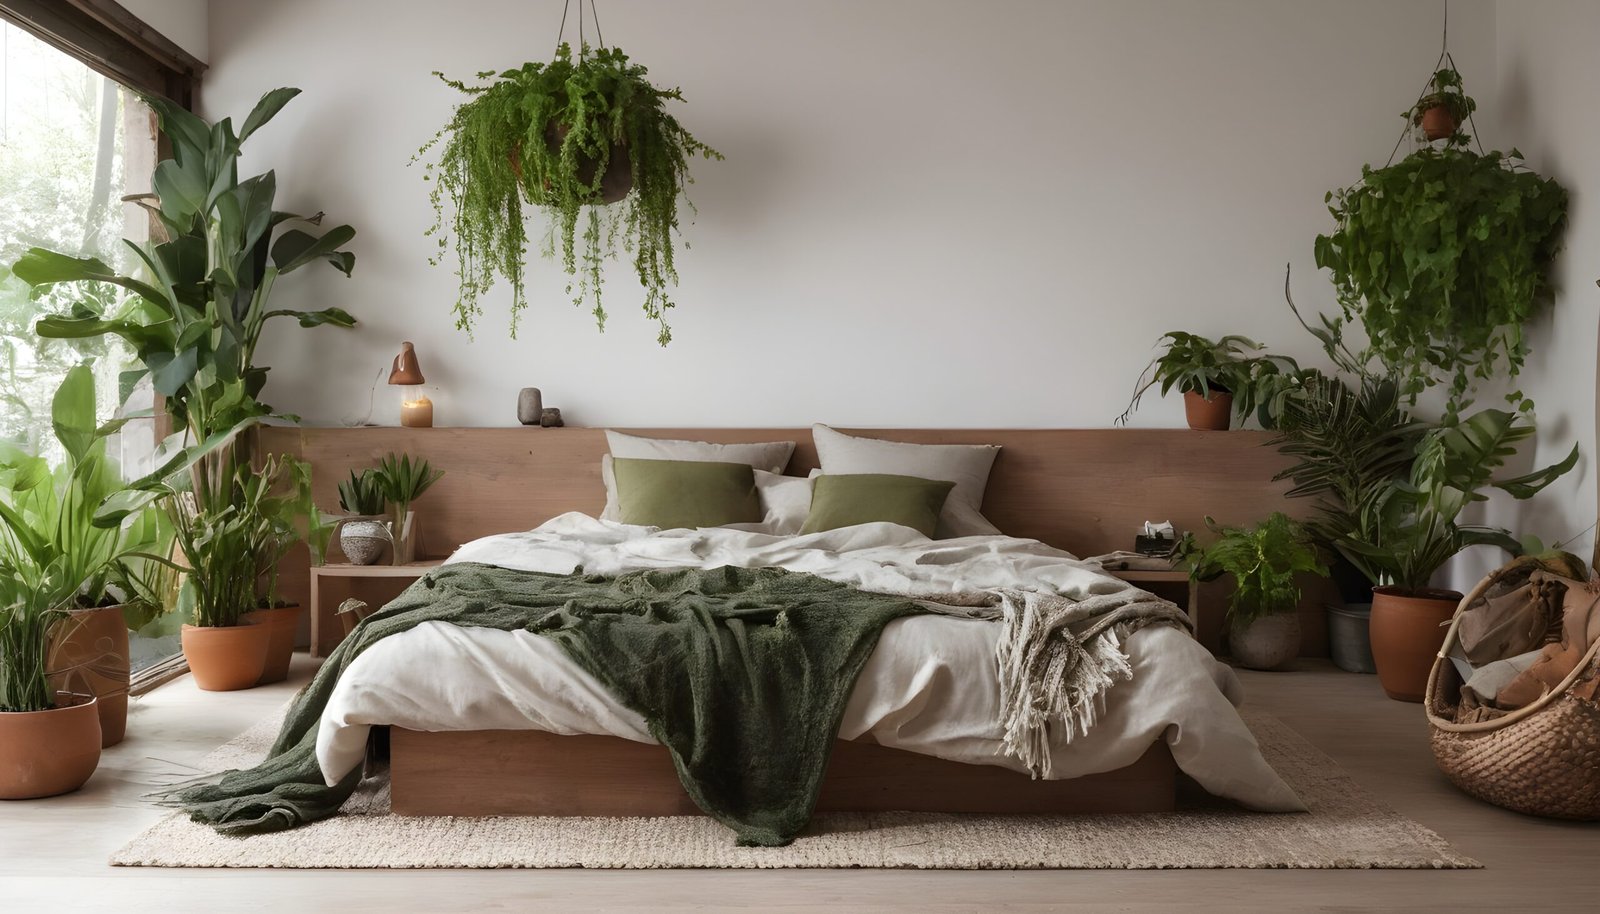 Biophilic bedroom with earthy colors and lots of greenery.